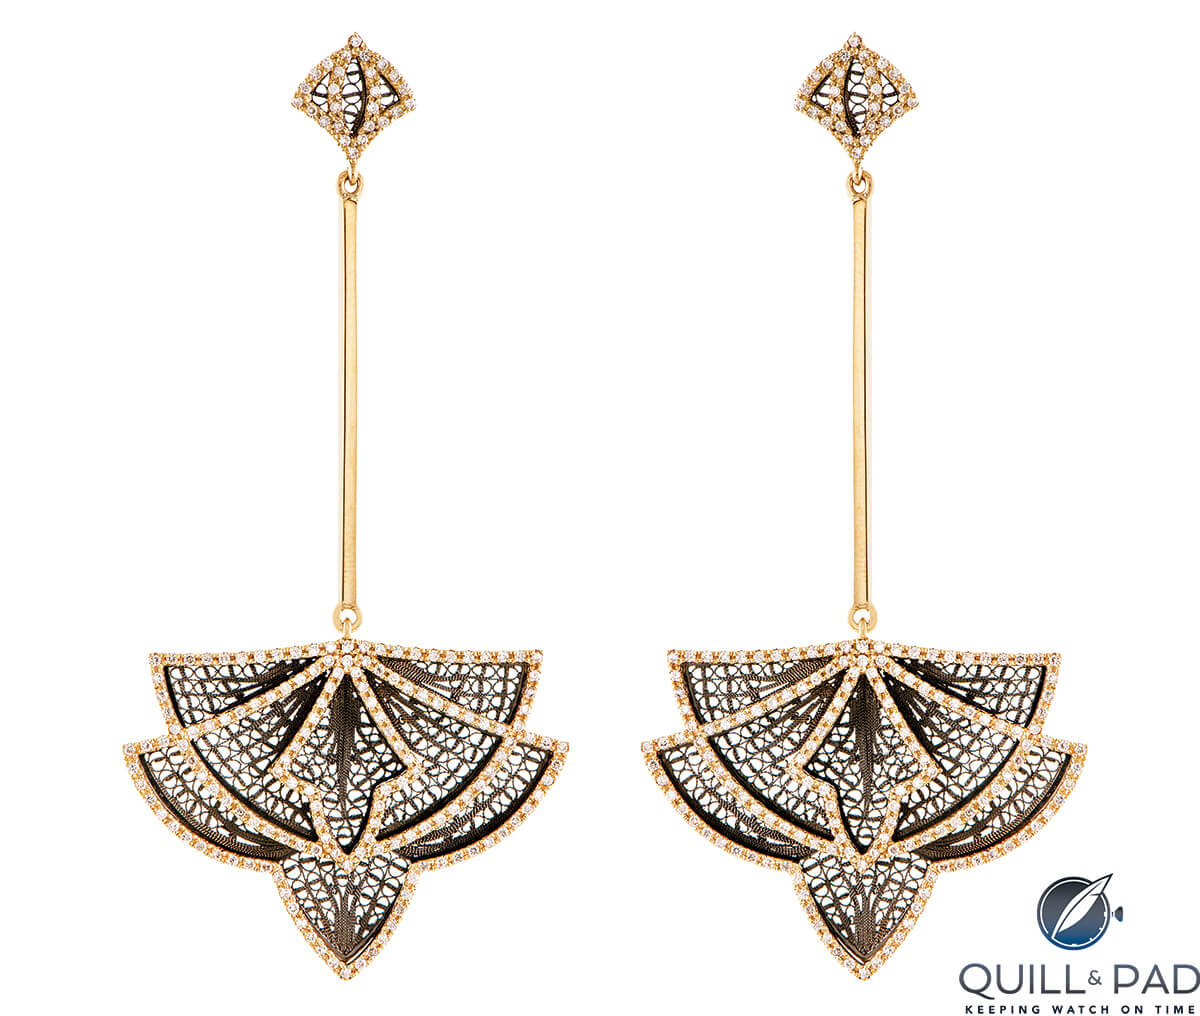 Eleuterio earrings in yellow gold and ruthenium from the Couture collection